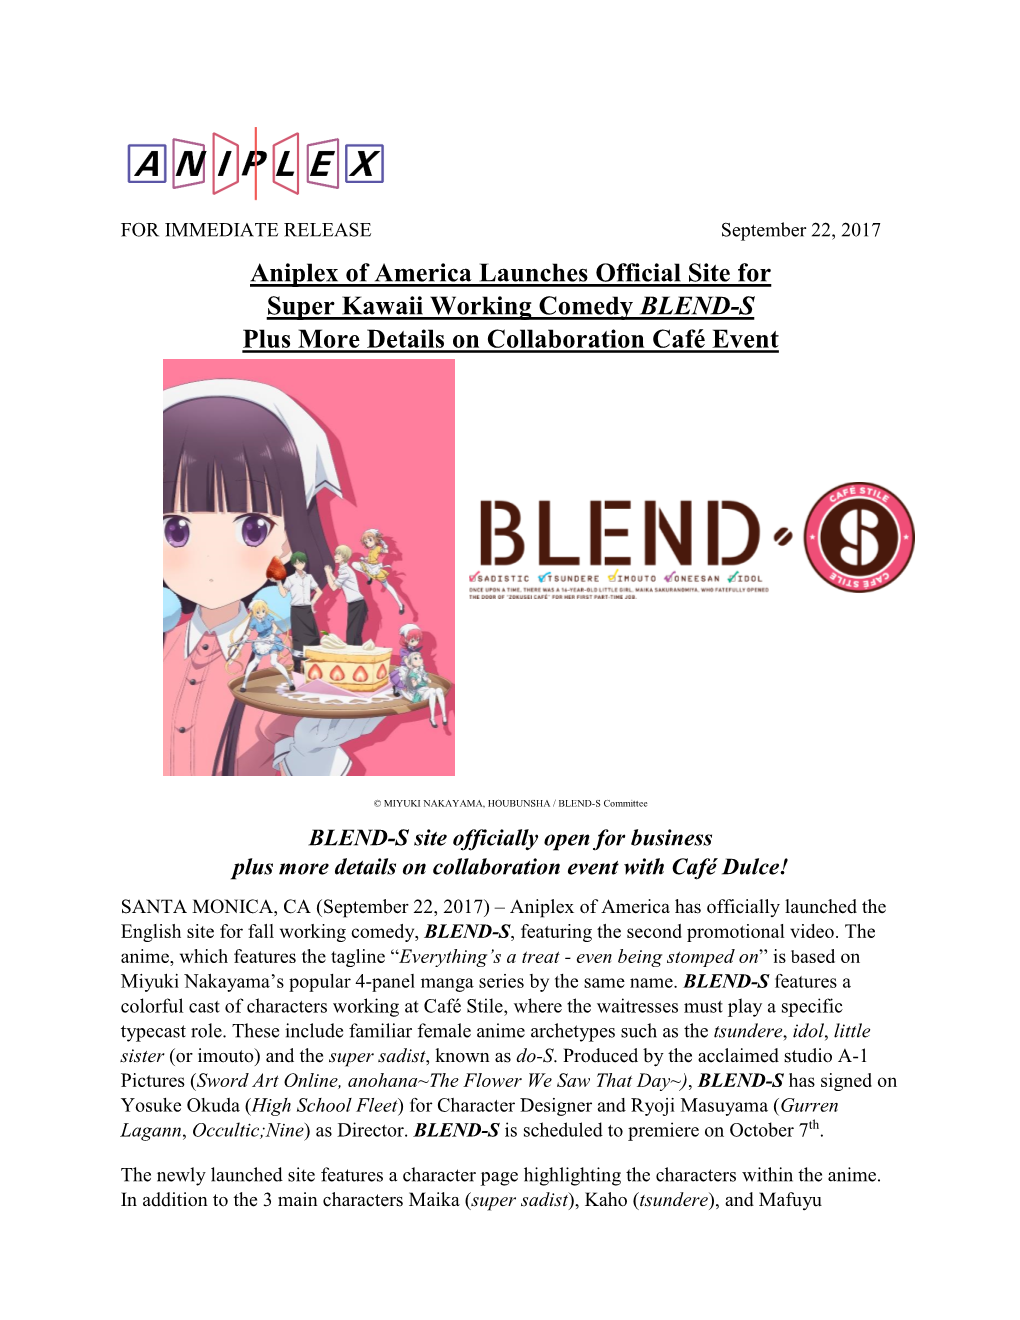 Aniplex of America Launches Official Site for Super Kawaii Working Comedy BLEND-S Plus More Details on Collaboration Café Event